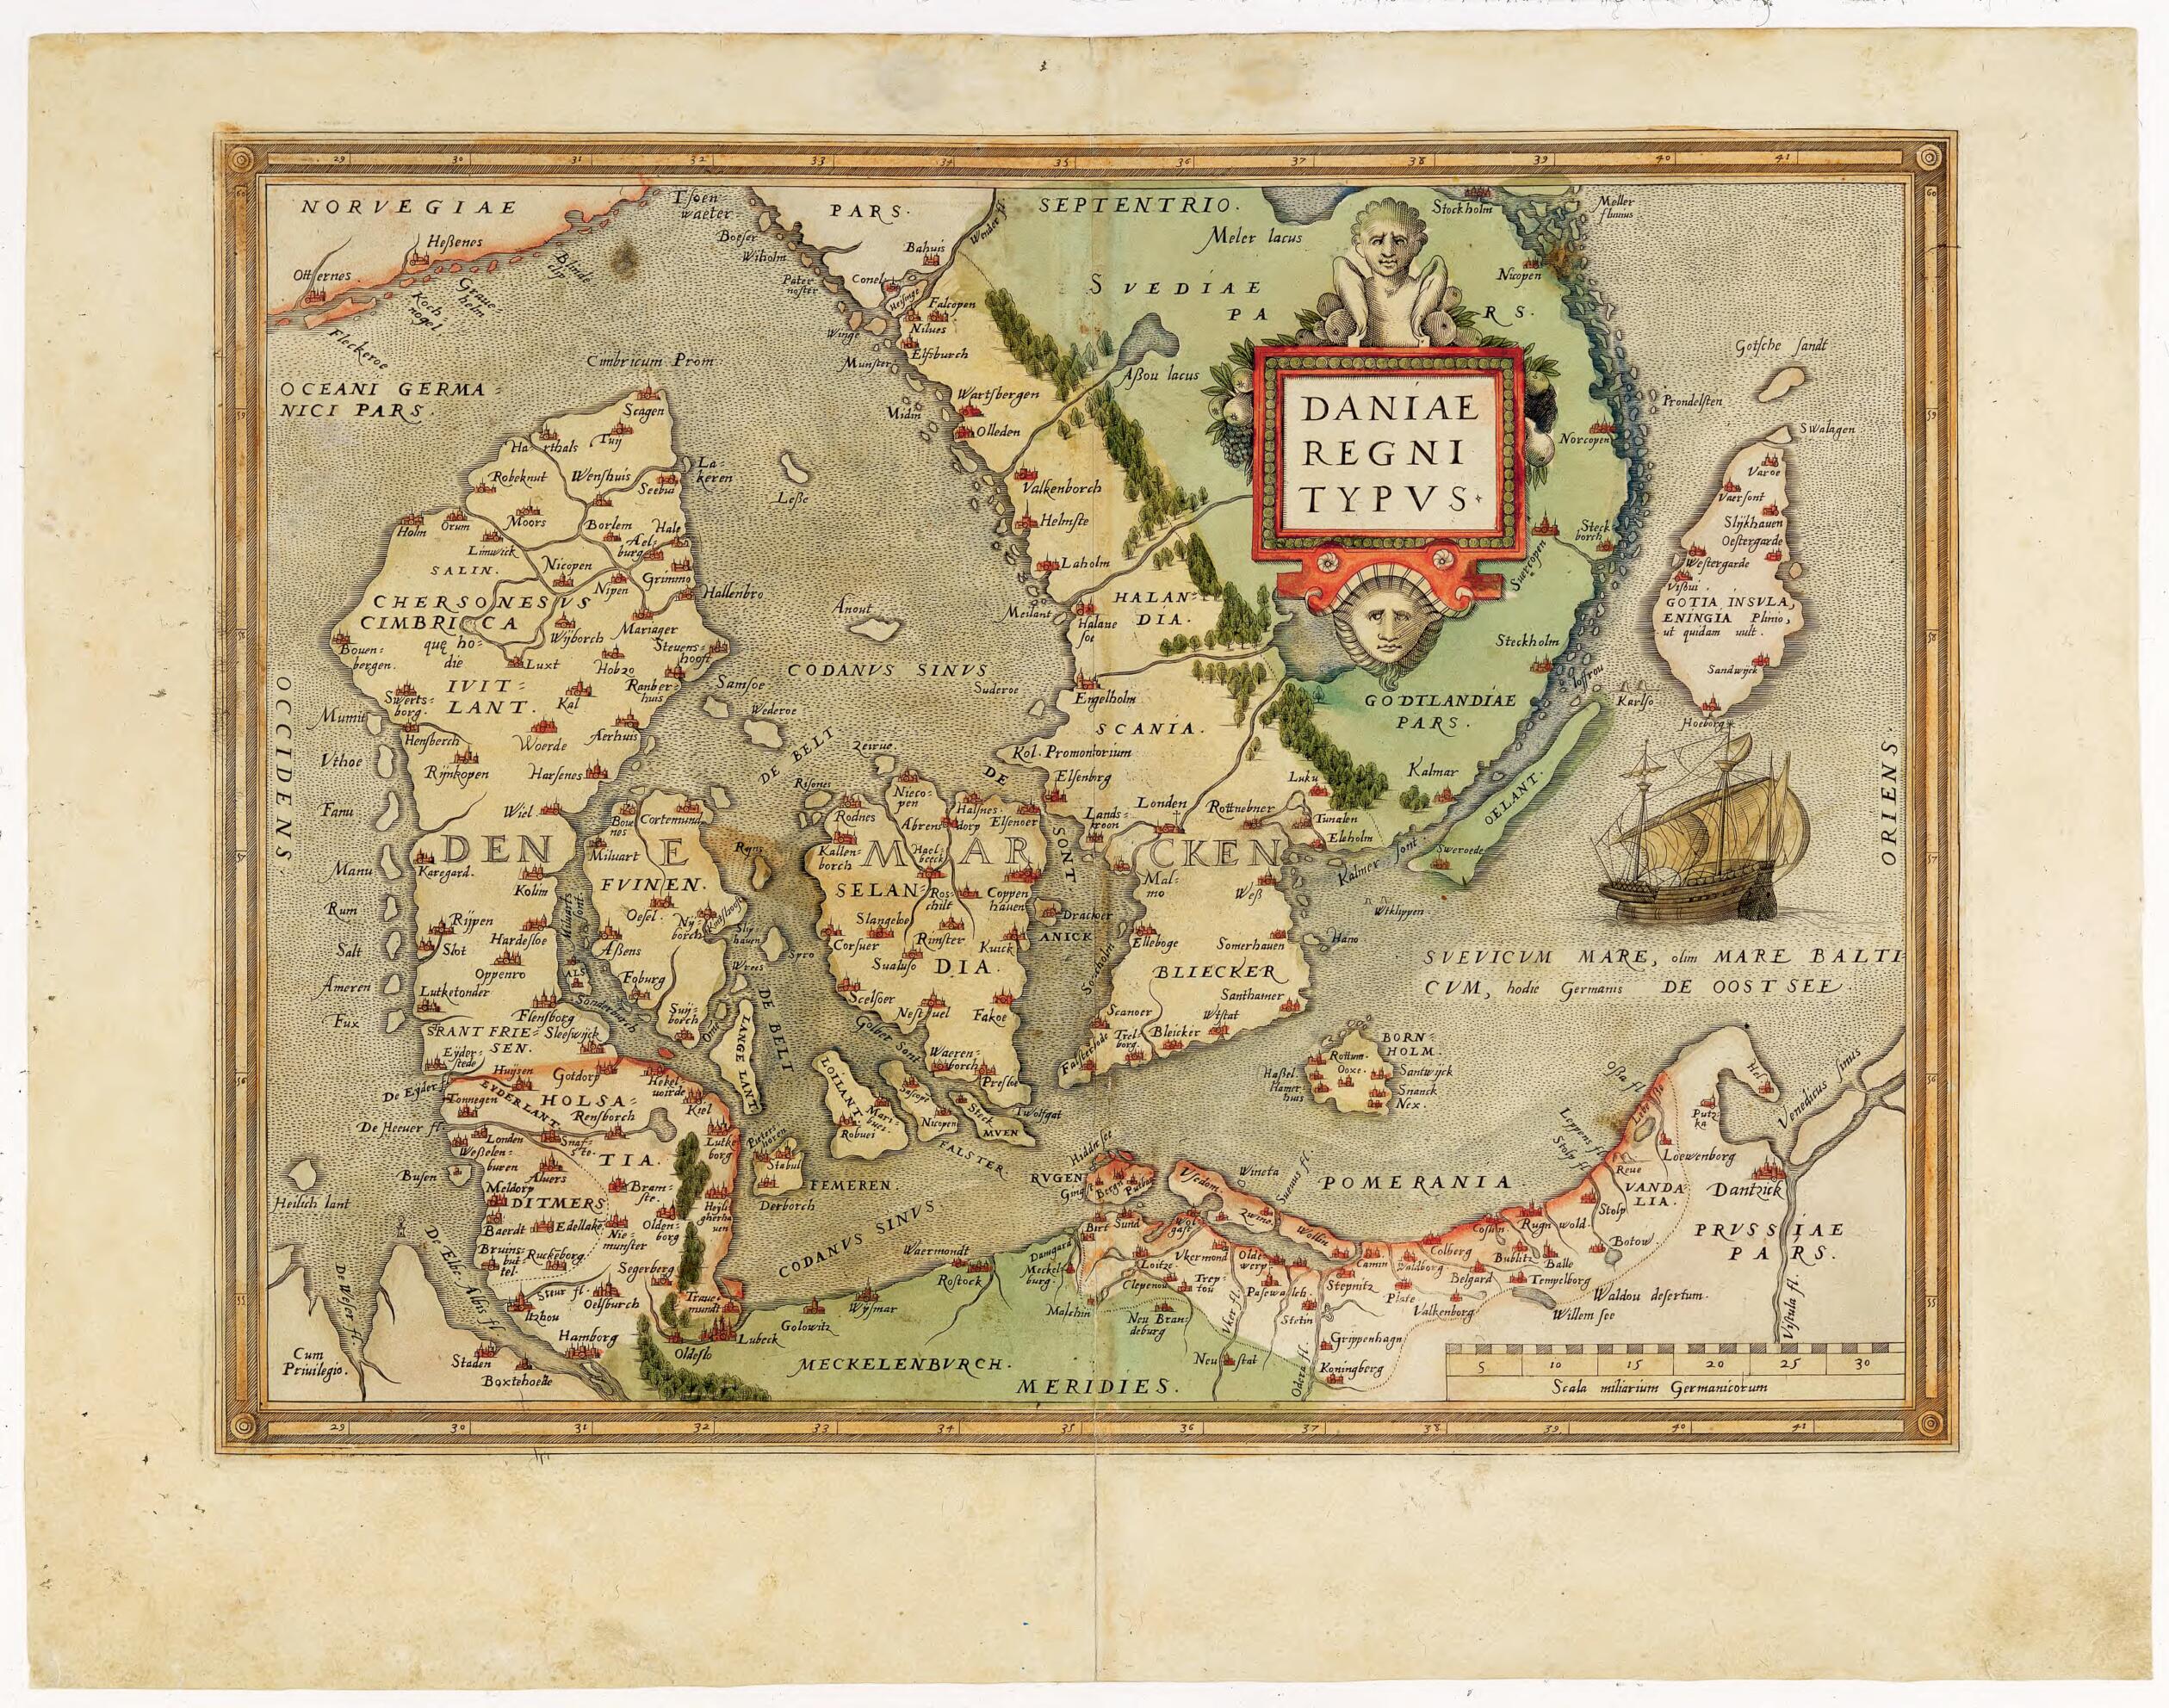 This old map of Map of Denmark from the Atlas Theatrum Orbis Terrarum. (Daniae Regni Typus) from 1570 was created by Cornelis Antoniszoon, Marcus Jordan, Abraham Ortelius in 1570